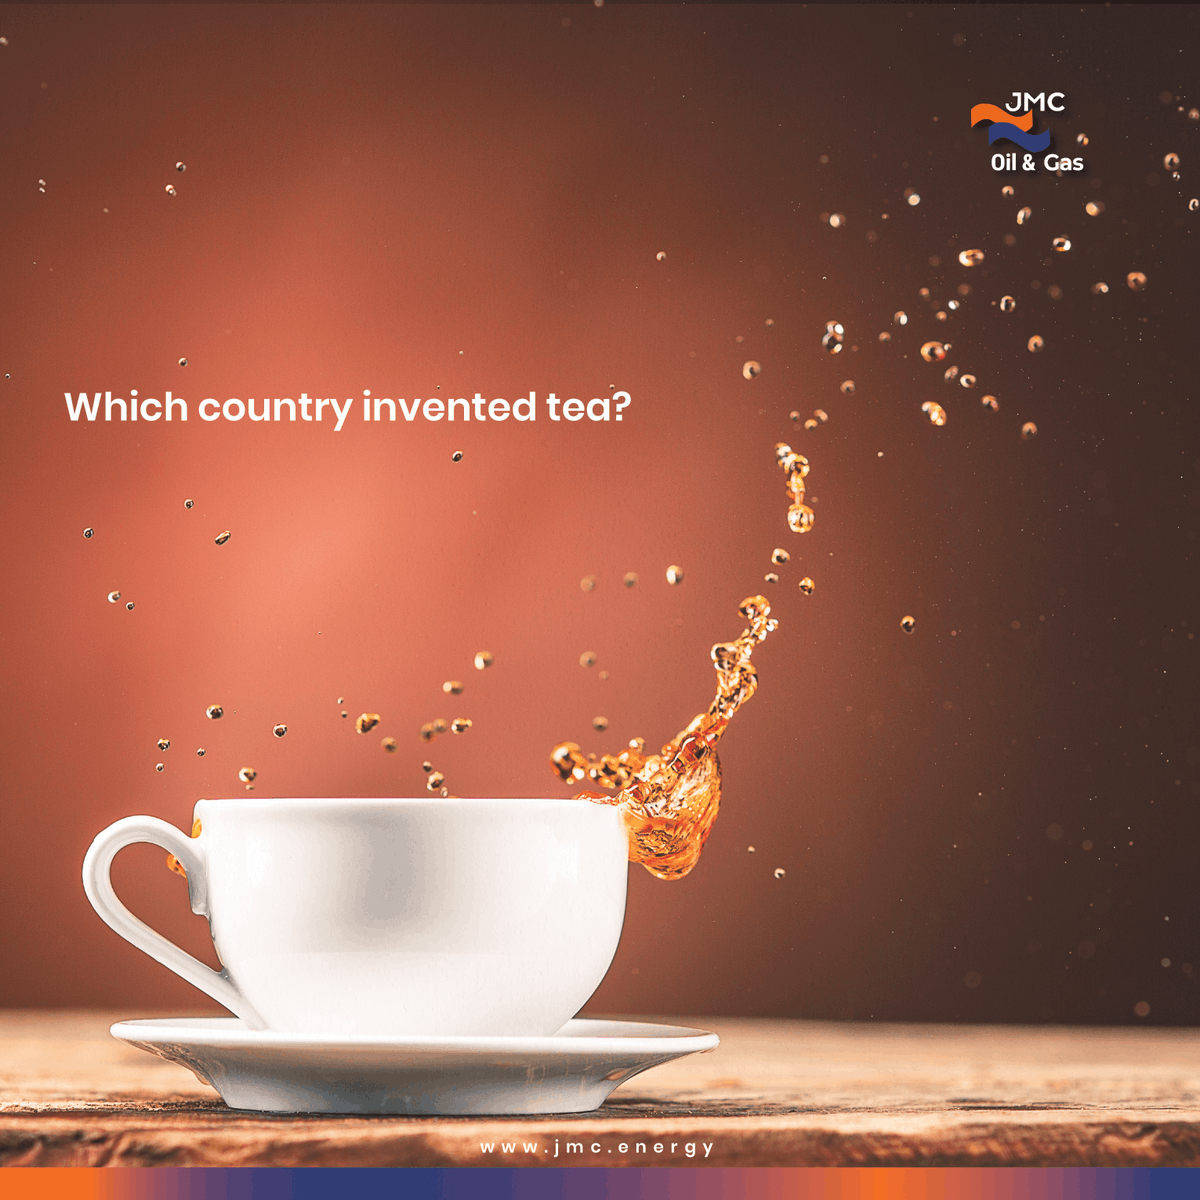 Its Friday, let's see who is smarter in our comment section!

Which country invented tea?

#tgif #friday #jmcoilandgas #energyindustry #oilcompany #oilandgasindustry #oil #oilandgas #energy #oilandgaslife #petroleumengineering #petroleumengineer #petroleum